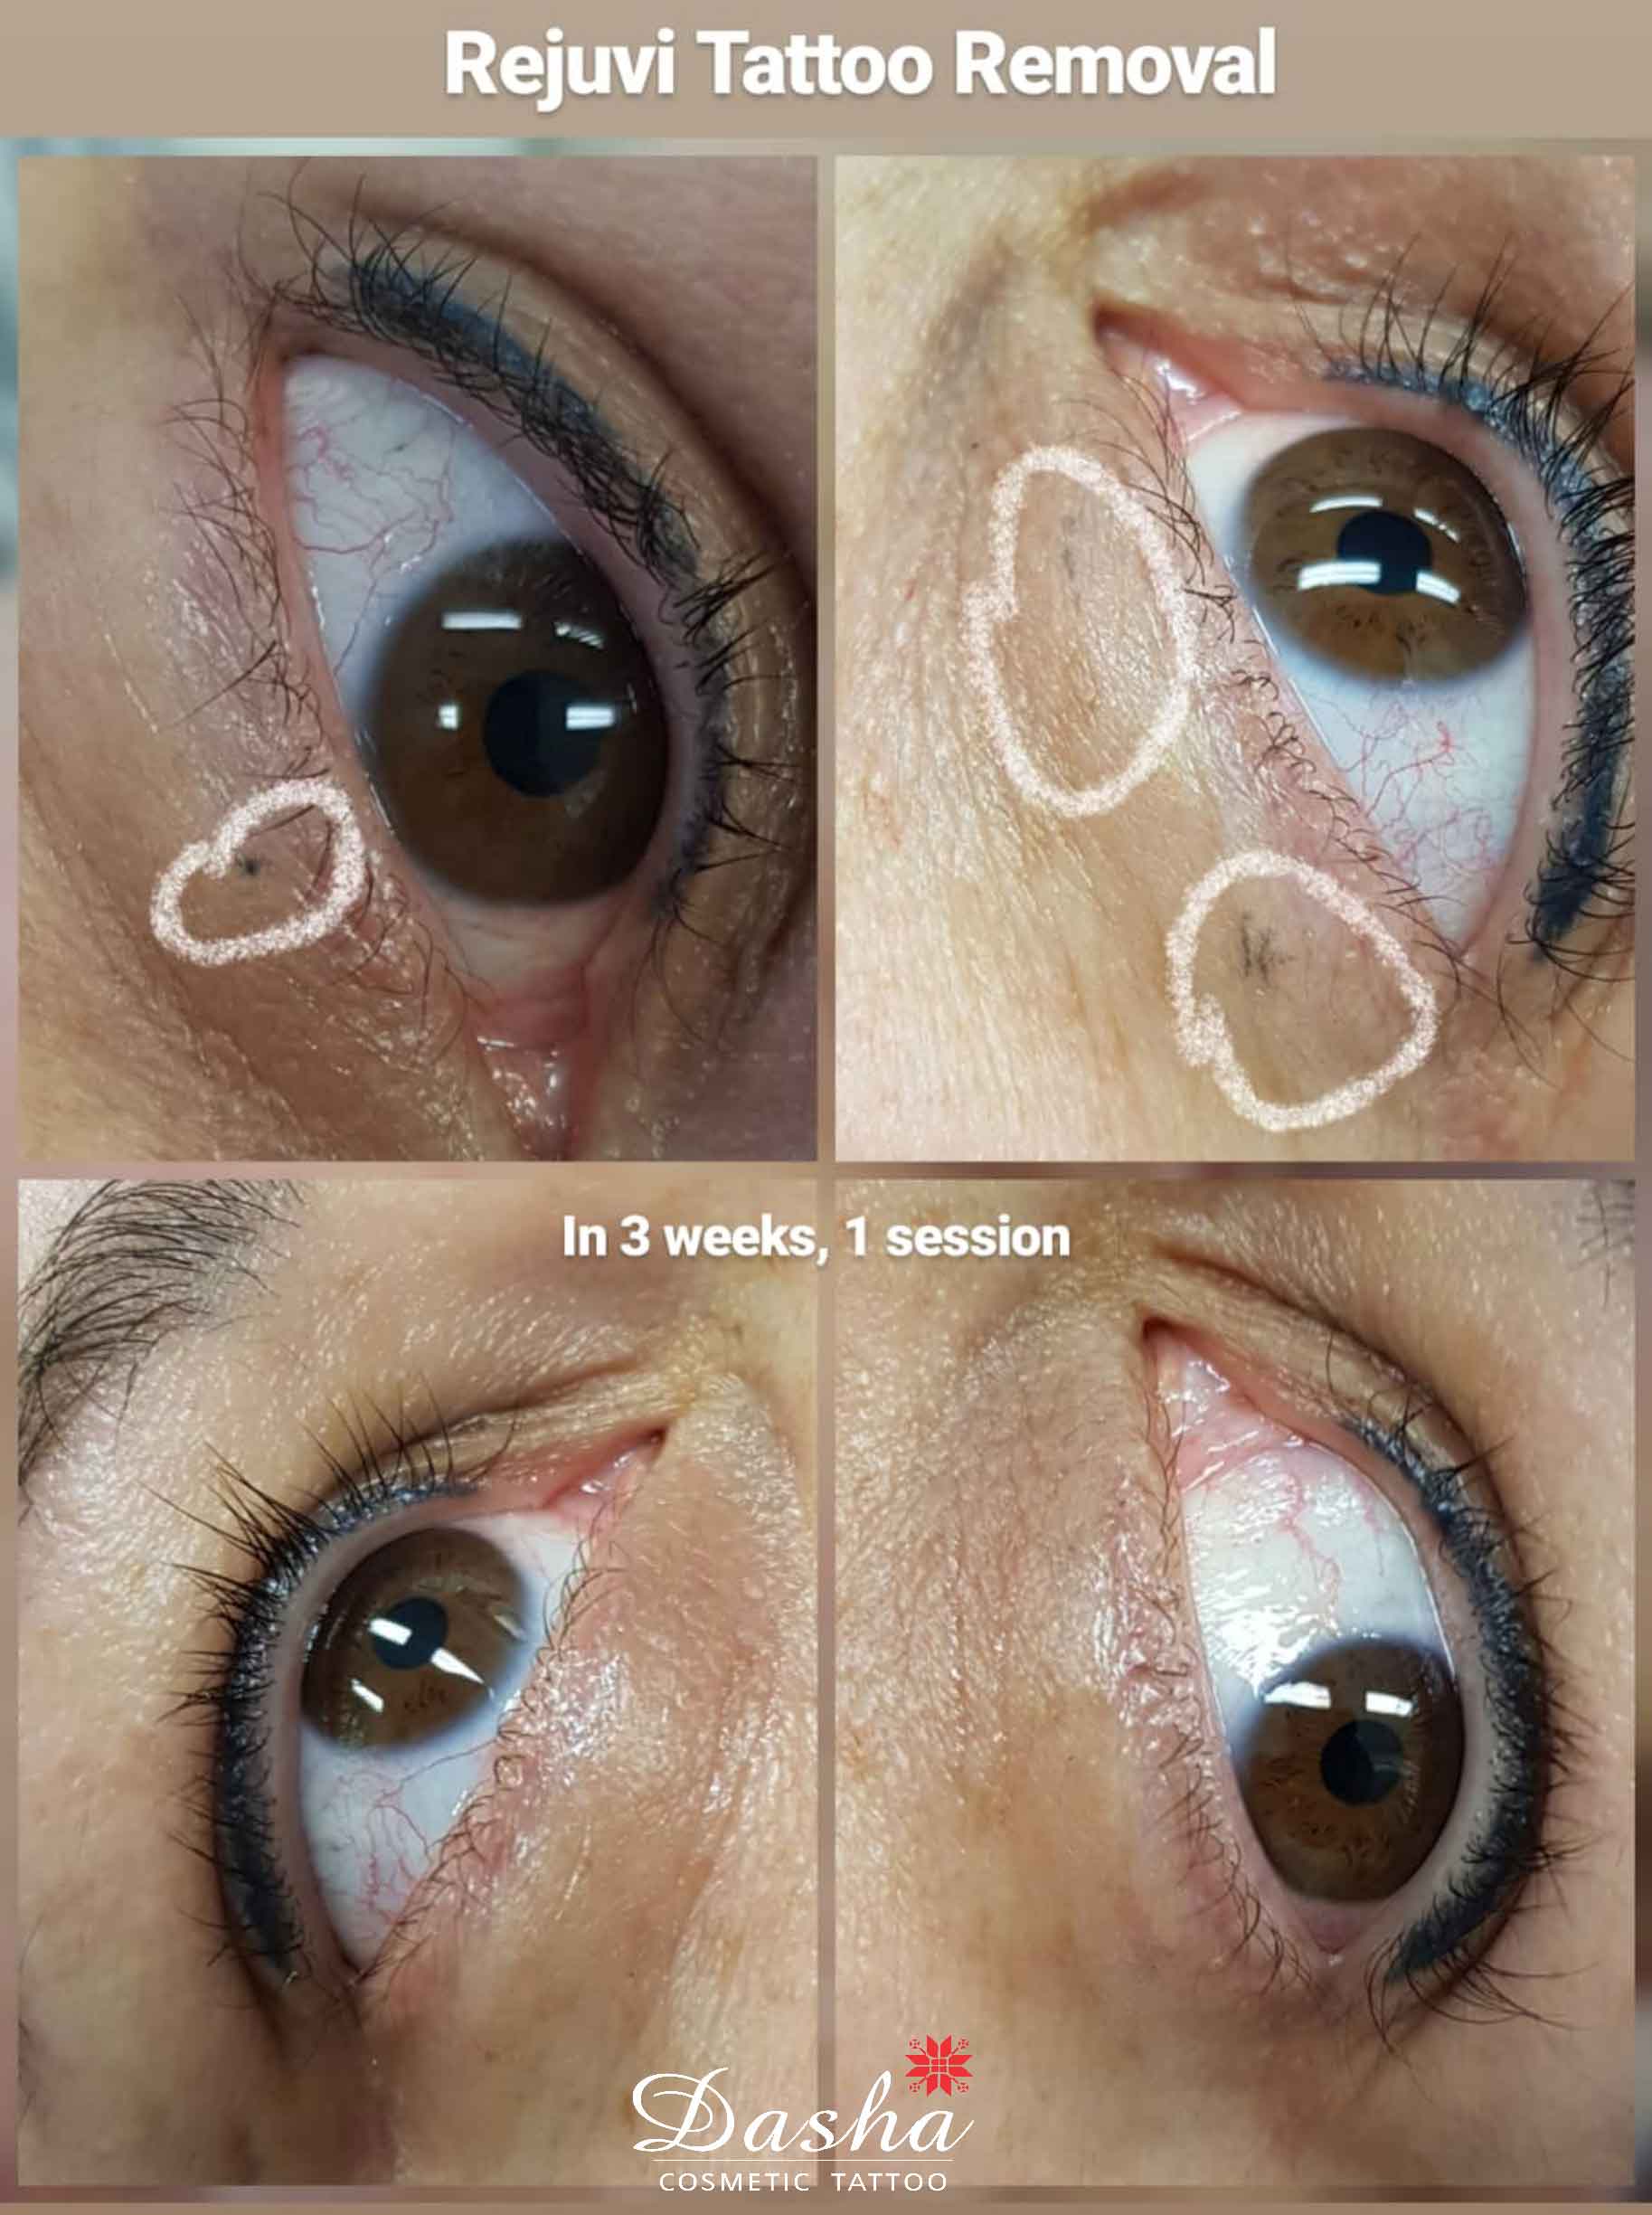 Rejuvi Tattoo Removal. Cosmetic and Mediical Tattoo by Dasha. Permanent makeup and reconstructive tattoo, scalp micro-pigmentation in Christchurch, New Zealand